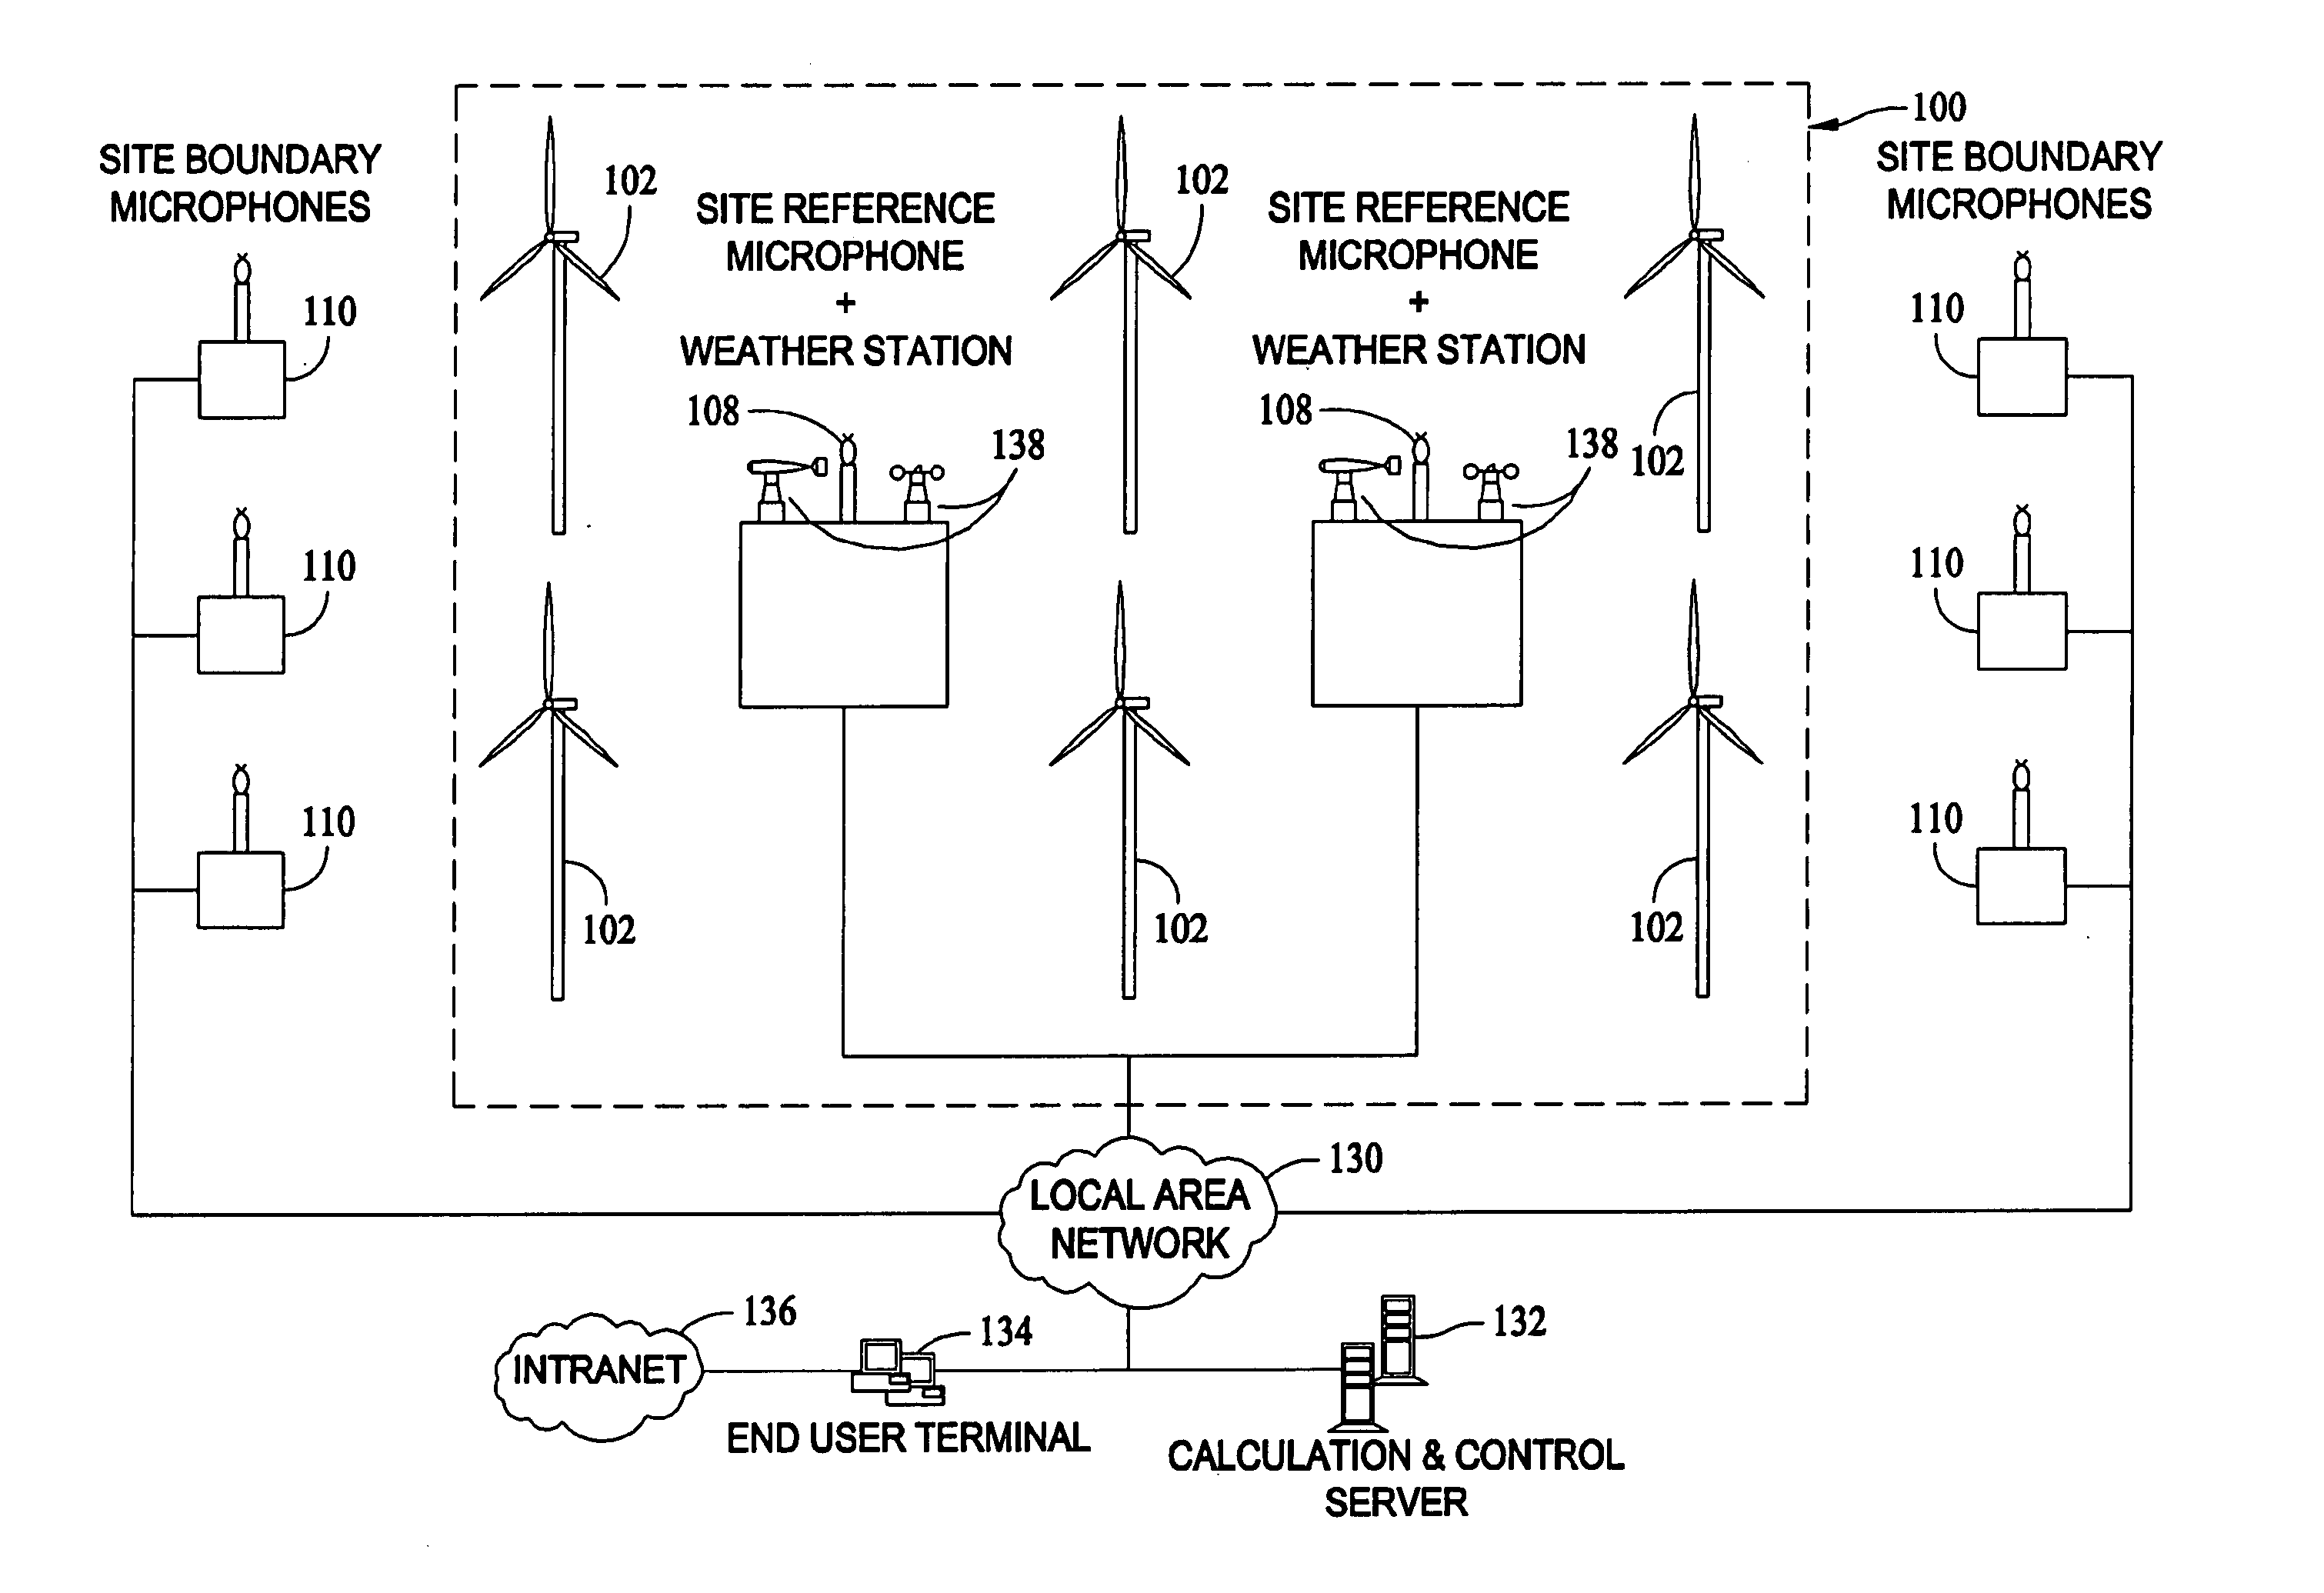 Method and apparatus for producing wind energy with reduced wind turbine noise